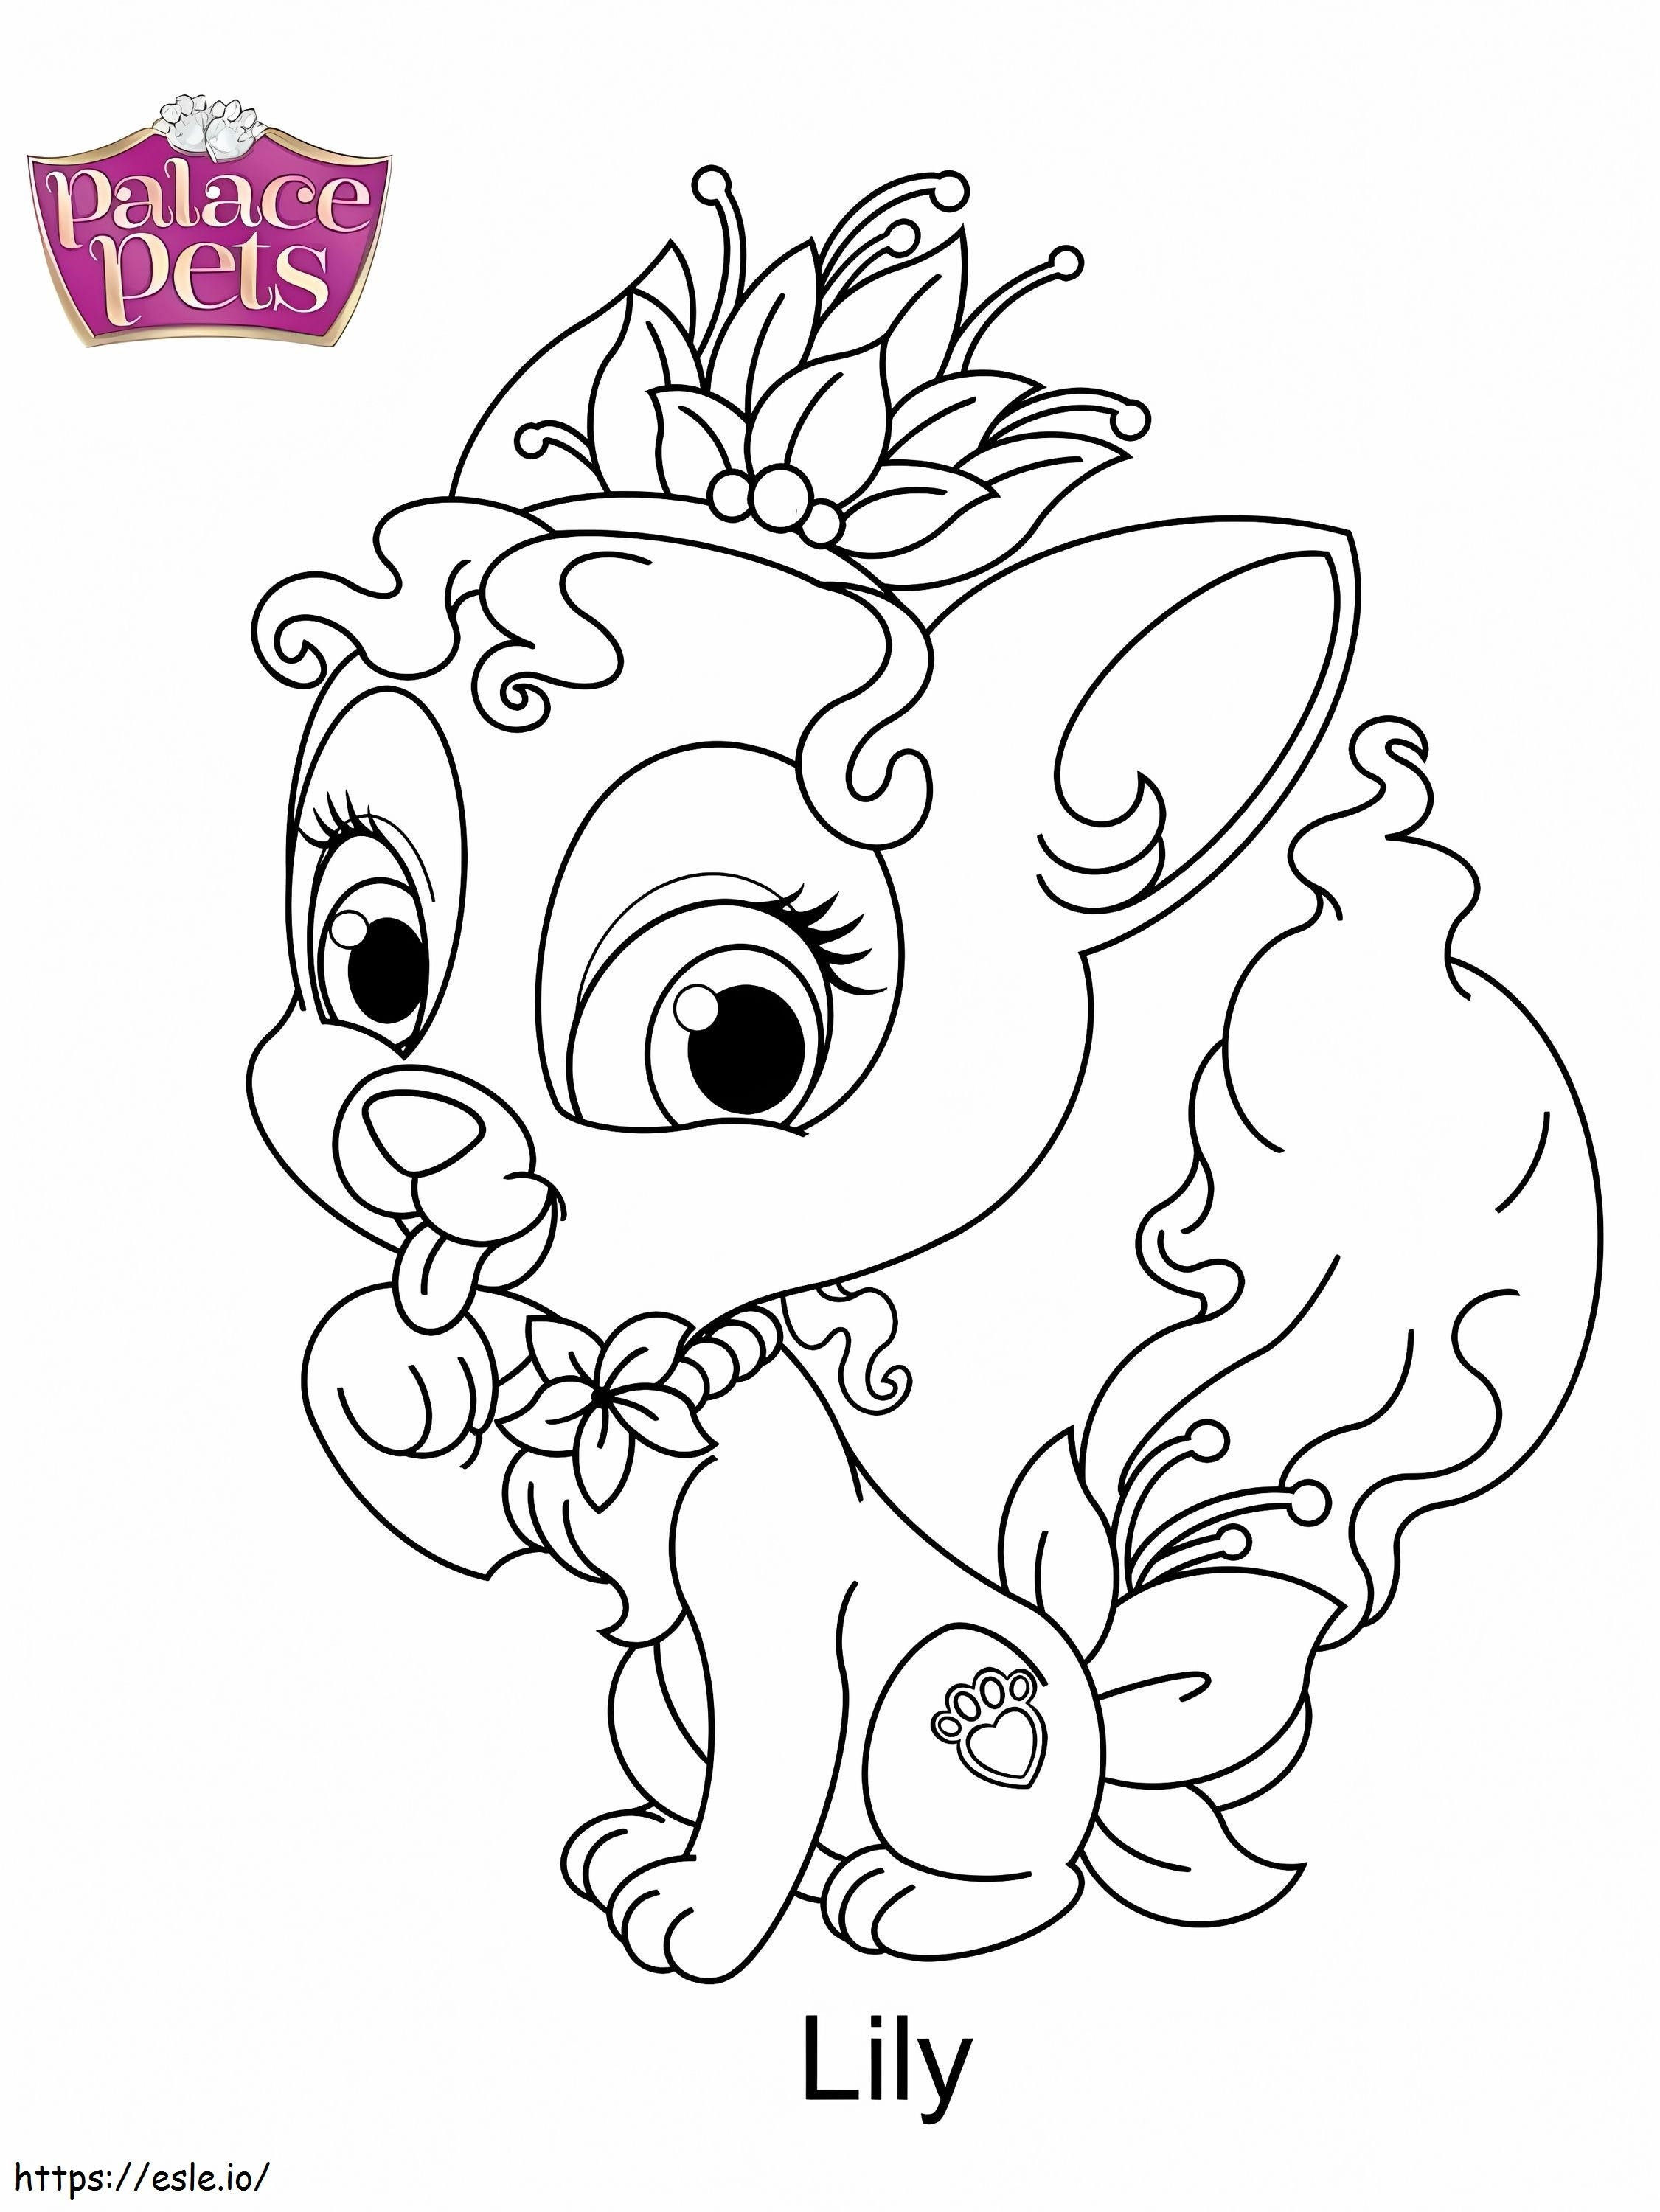 1587025516 Palace Pets Lily coloring page